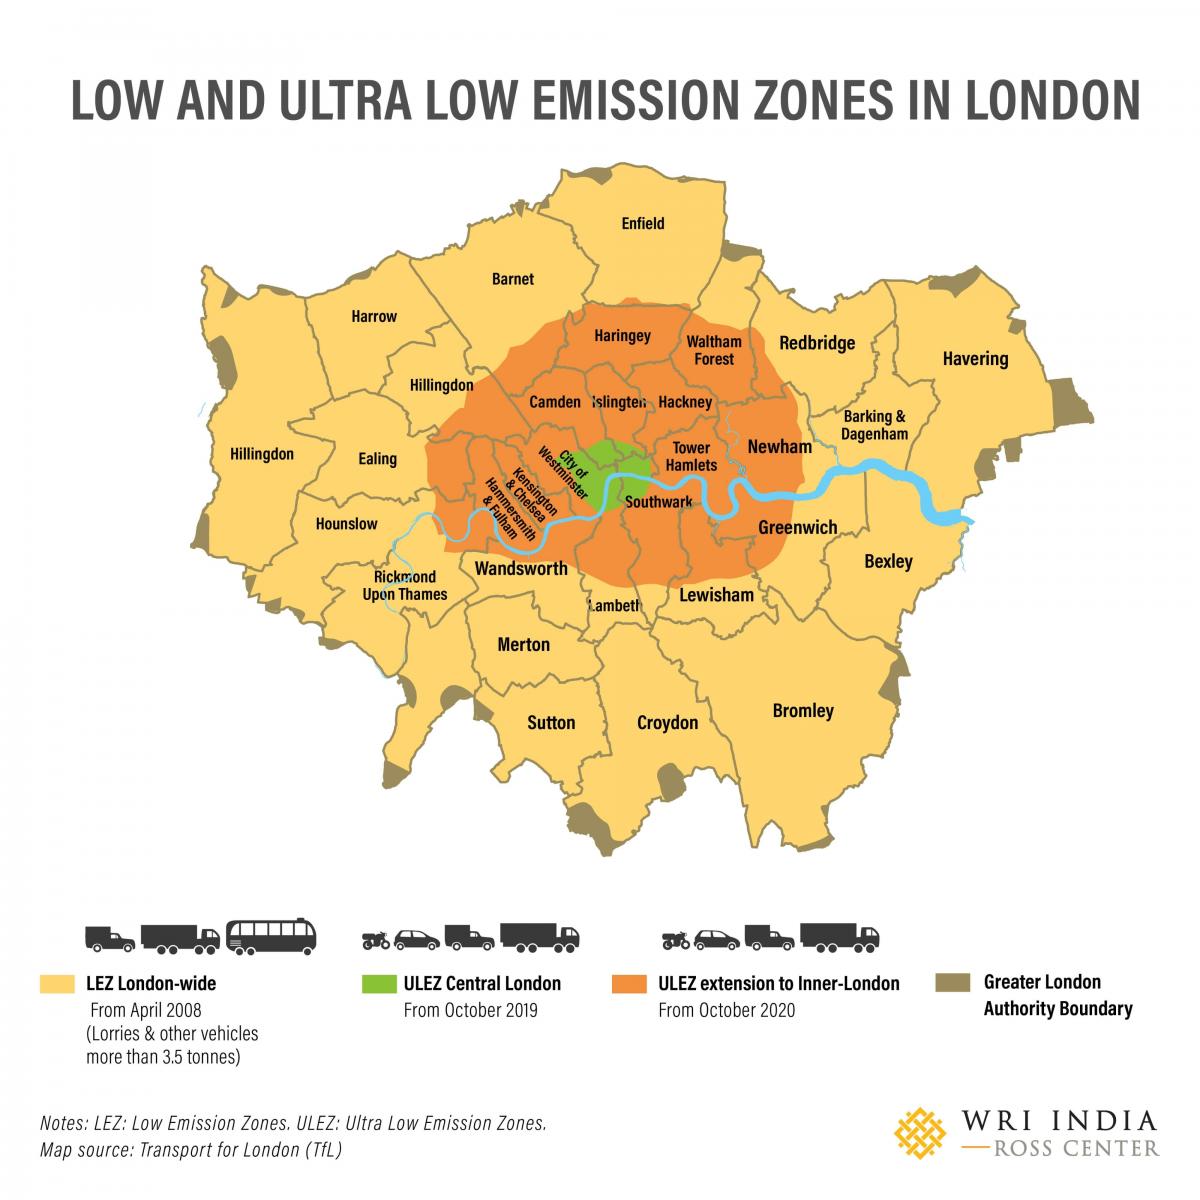 The Implementation of Low and Ultra Low Emission Zones (LEZ and ULEZ) in London